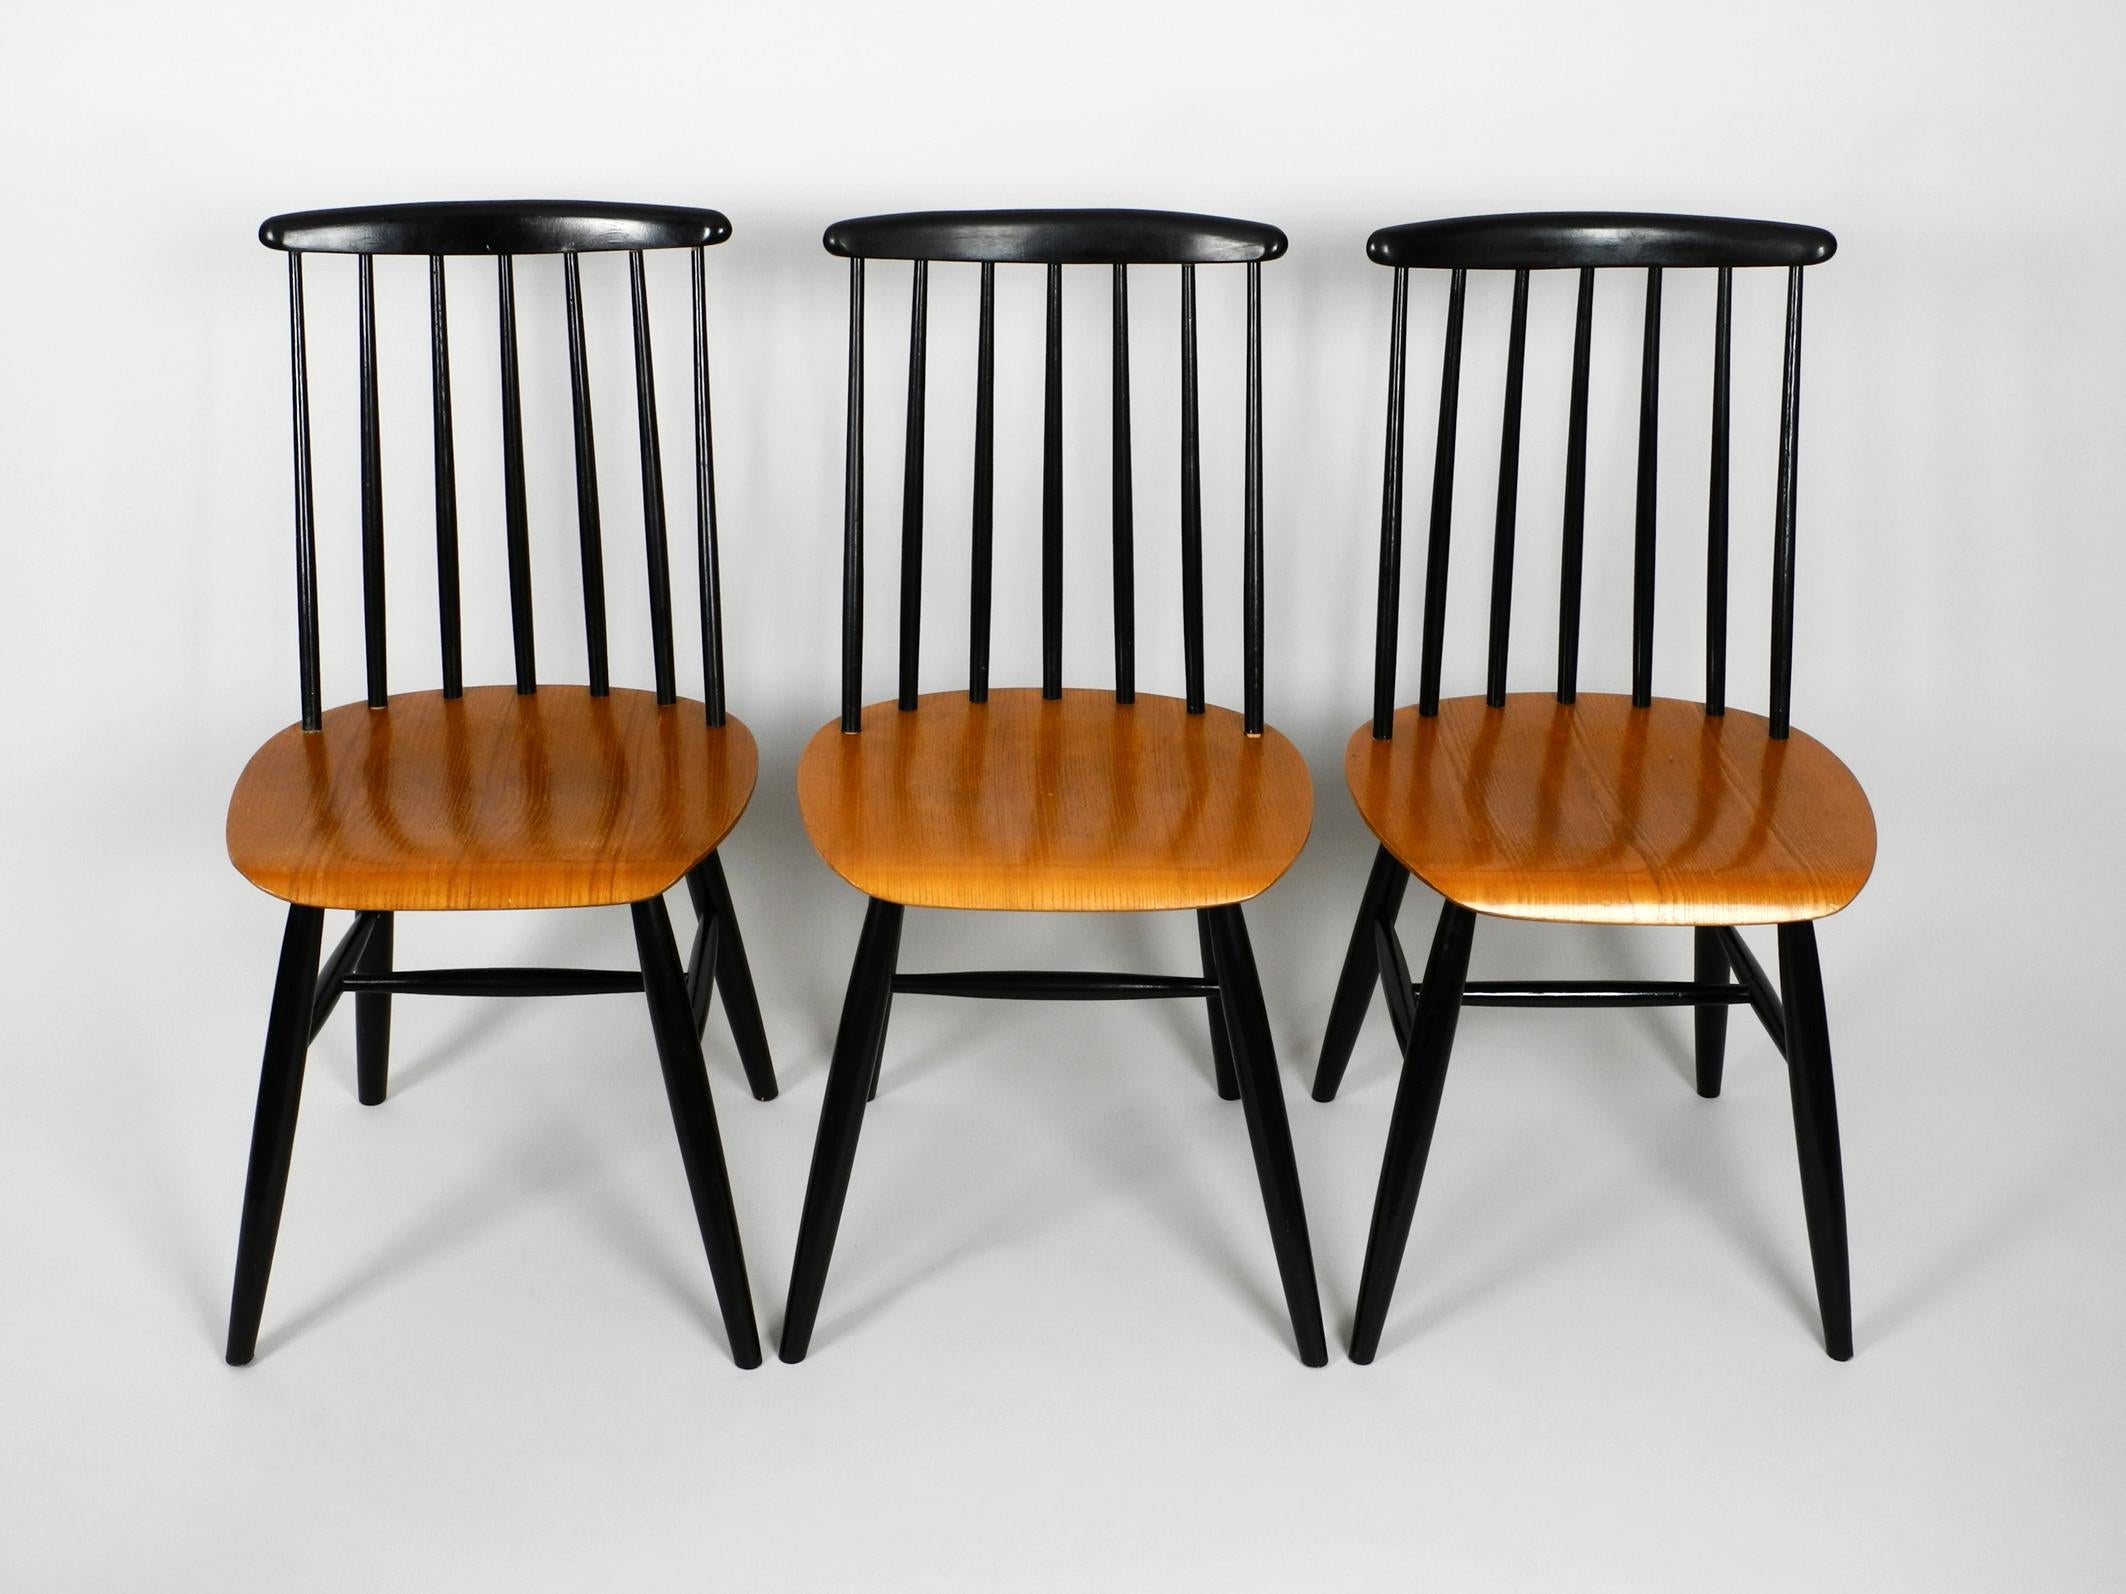 Set of Three Original Midcentury Wood Spindle Back Chairs with Teak Seat For Sale 5